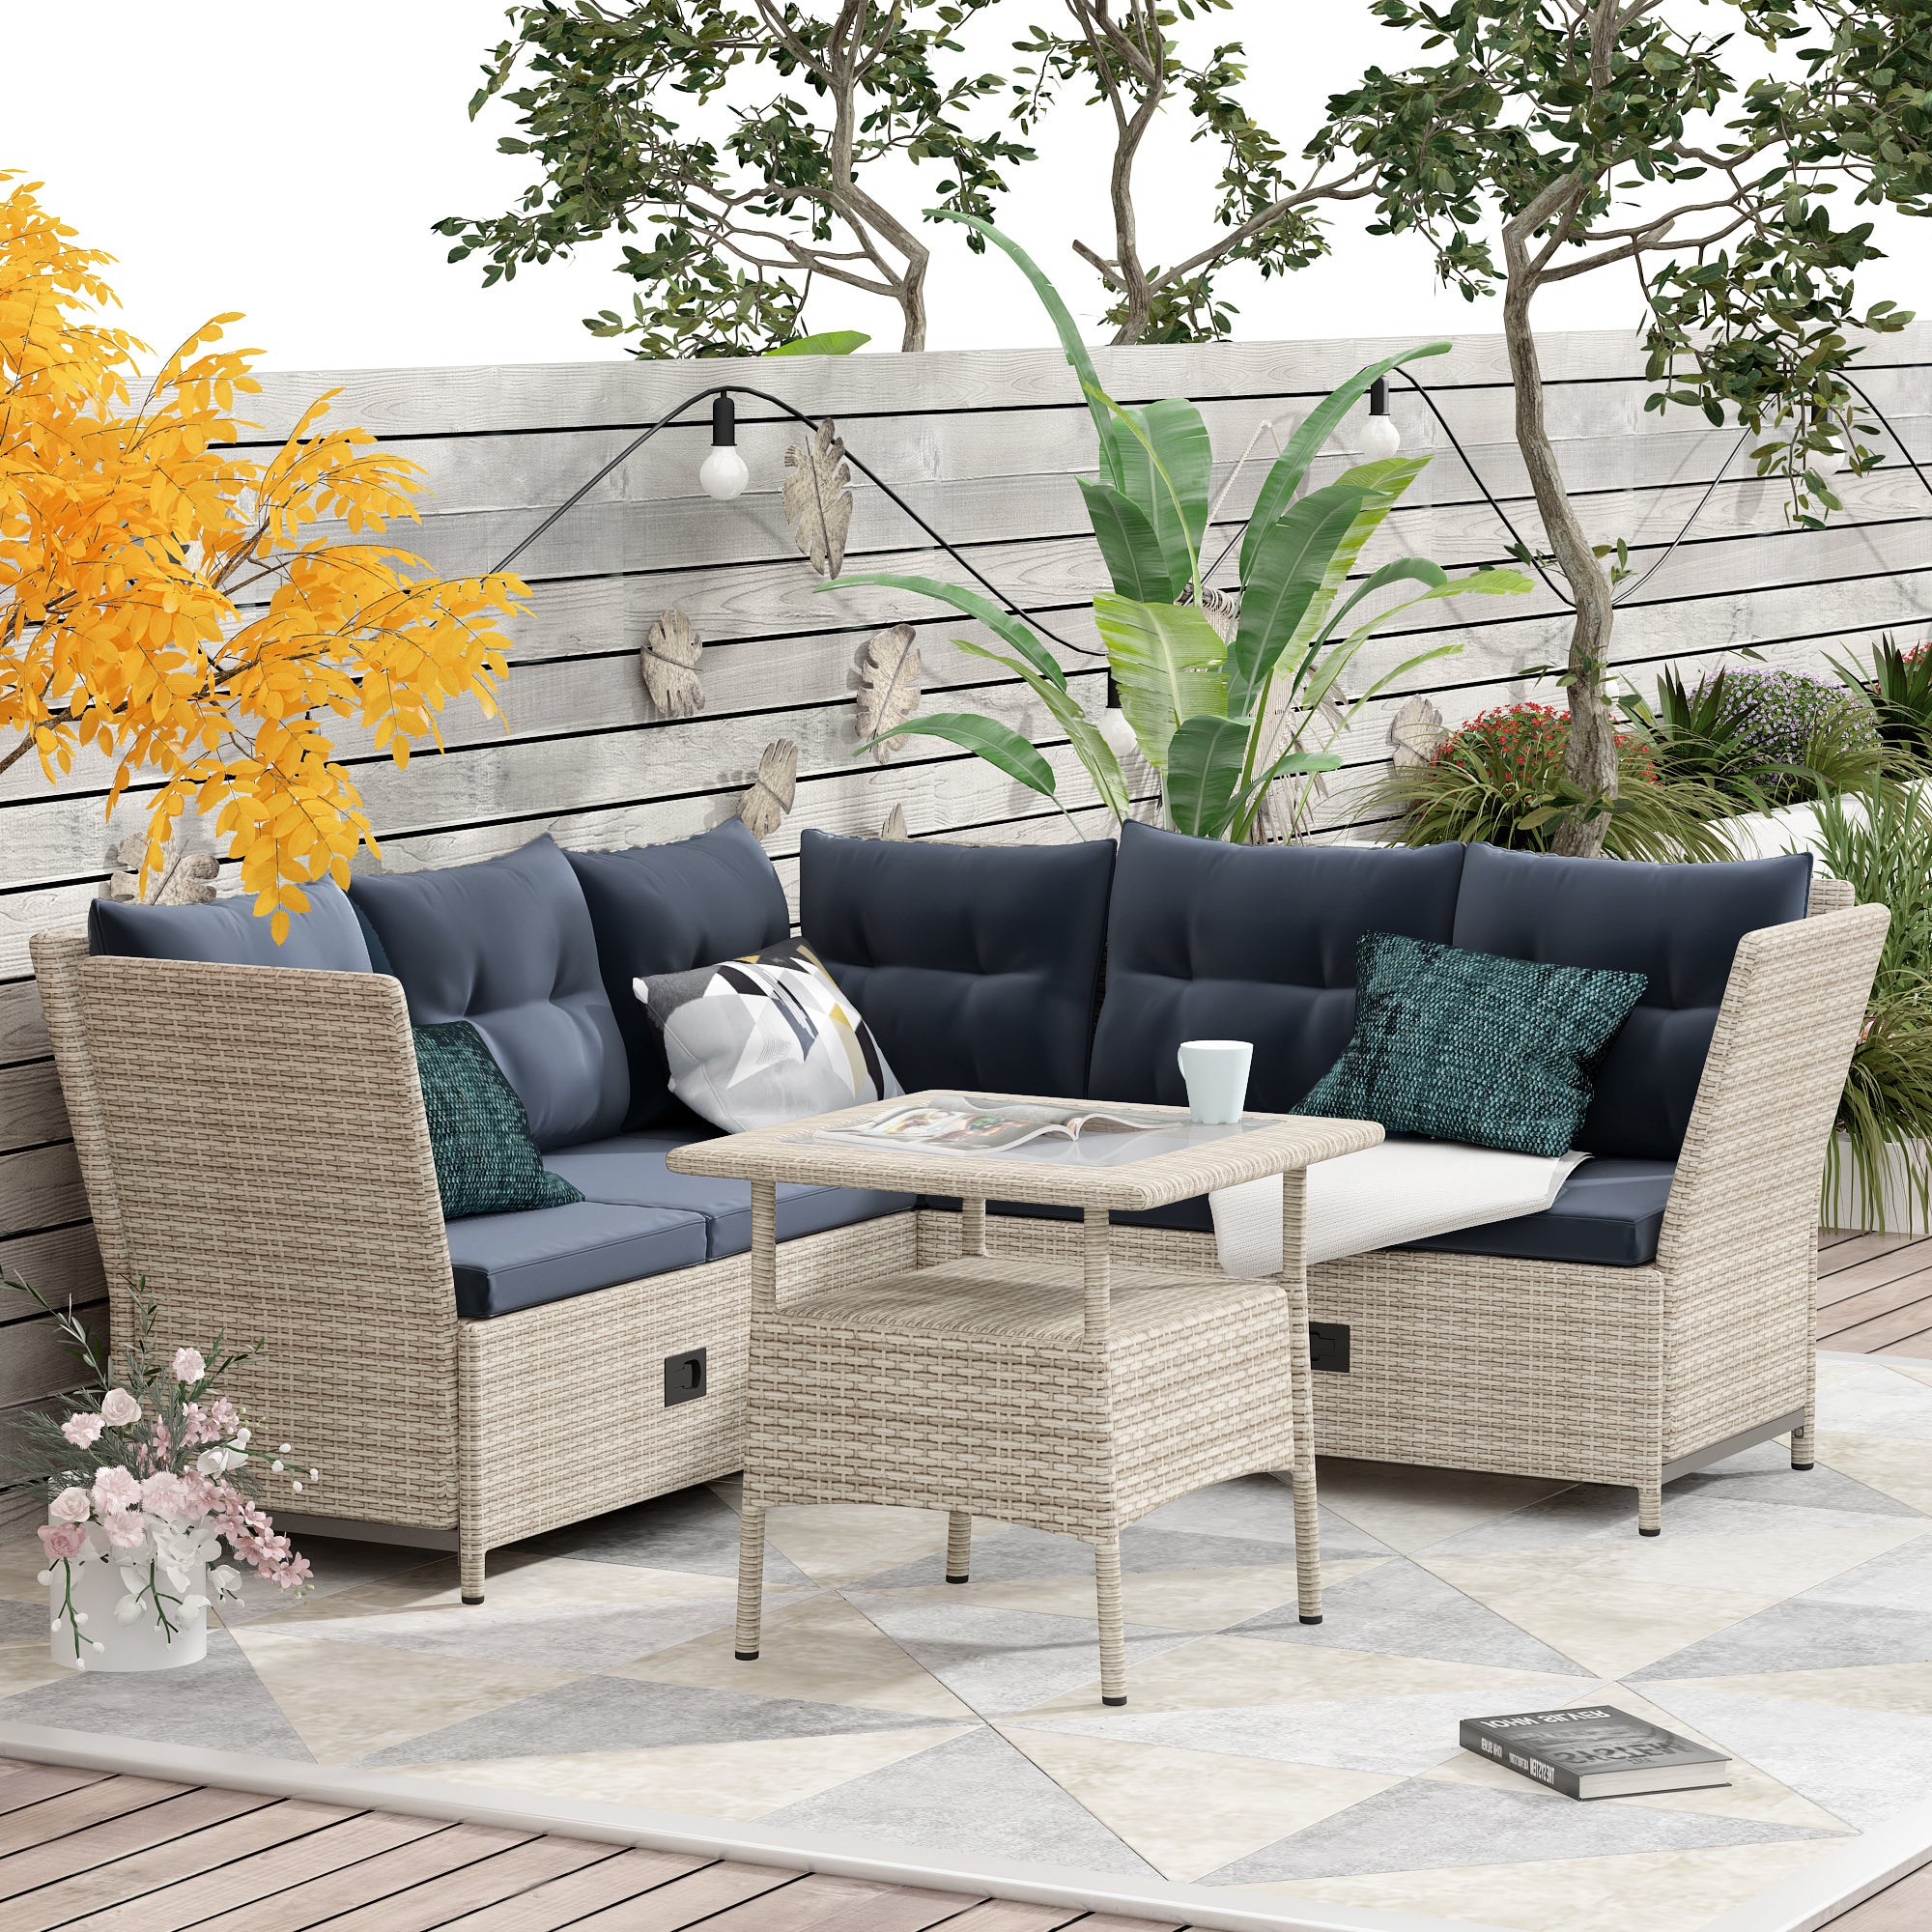 4-Piece Outdoor Wicker Sofa Set with Adjustable Backs and Table, Gray